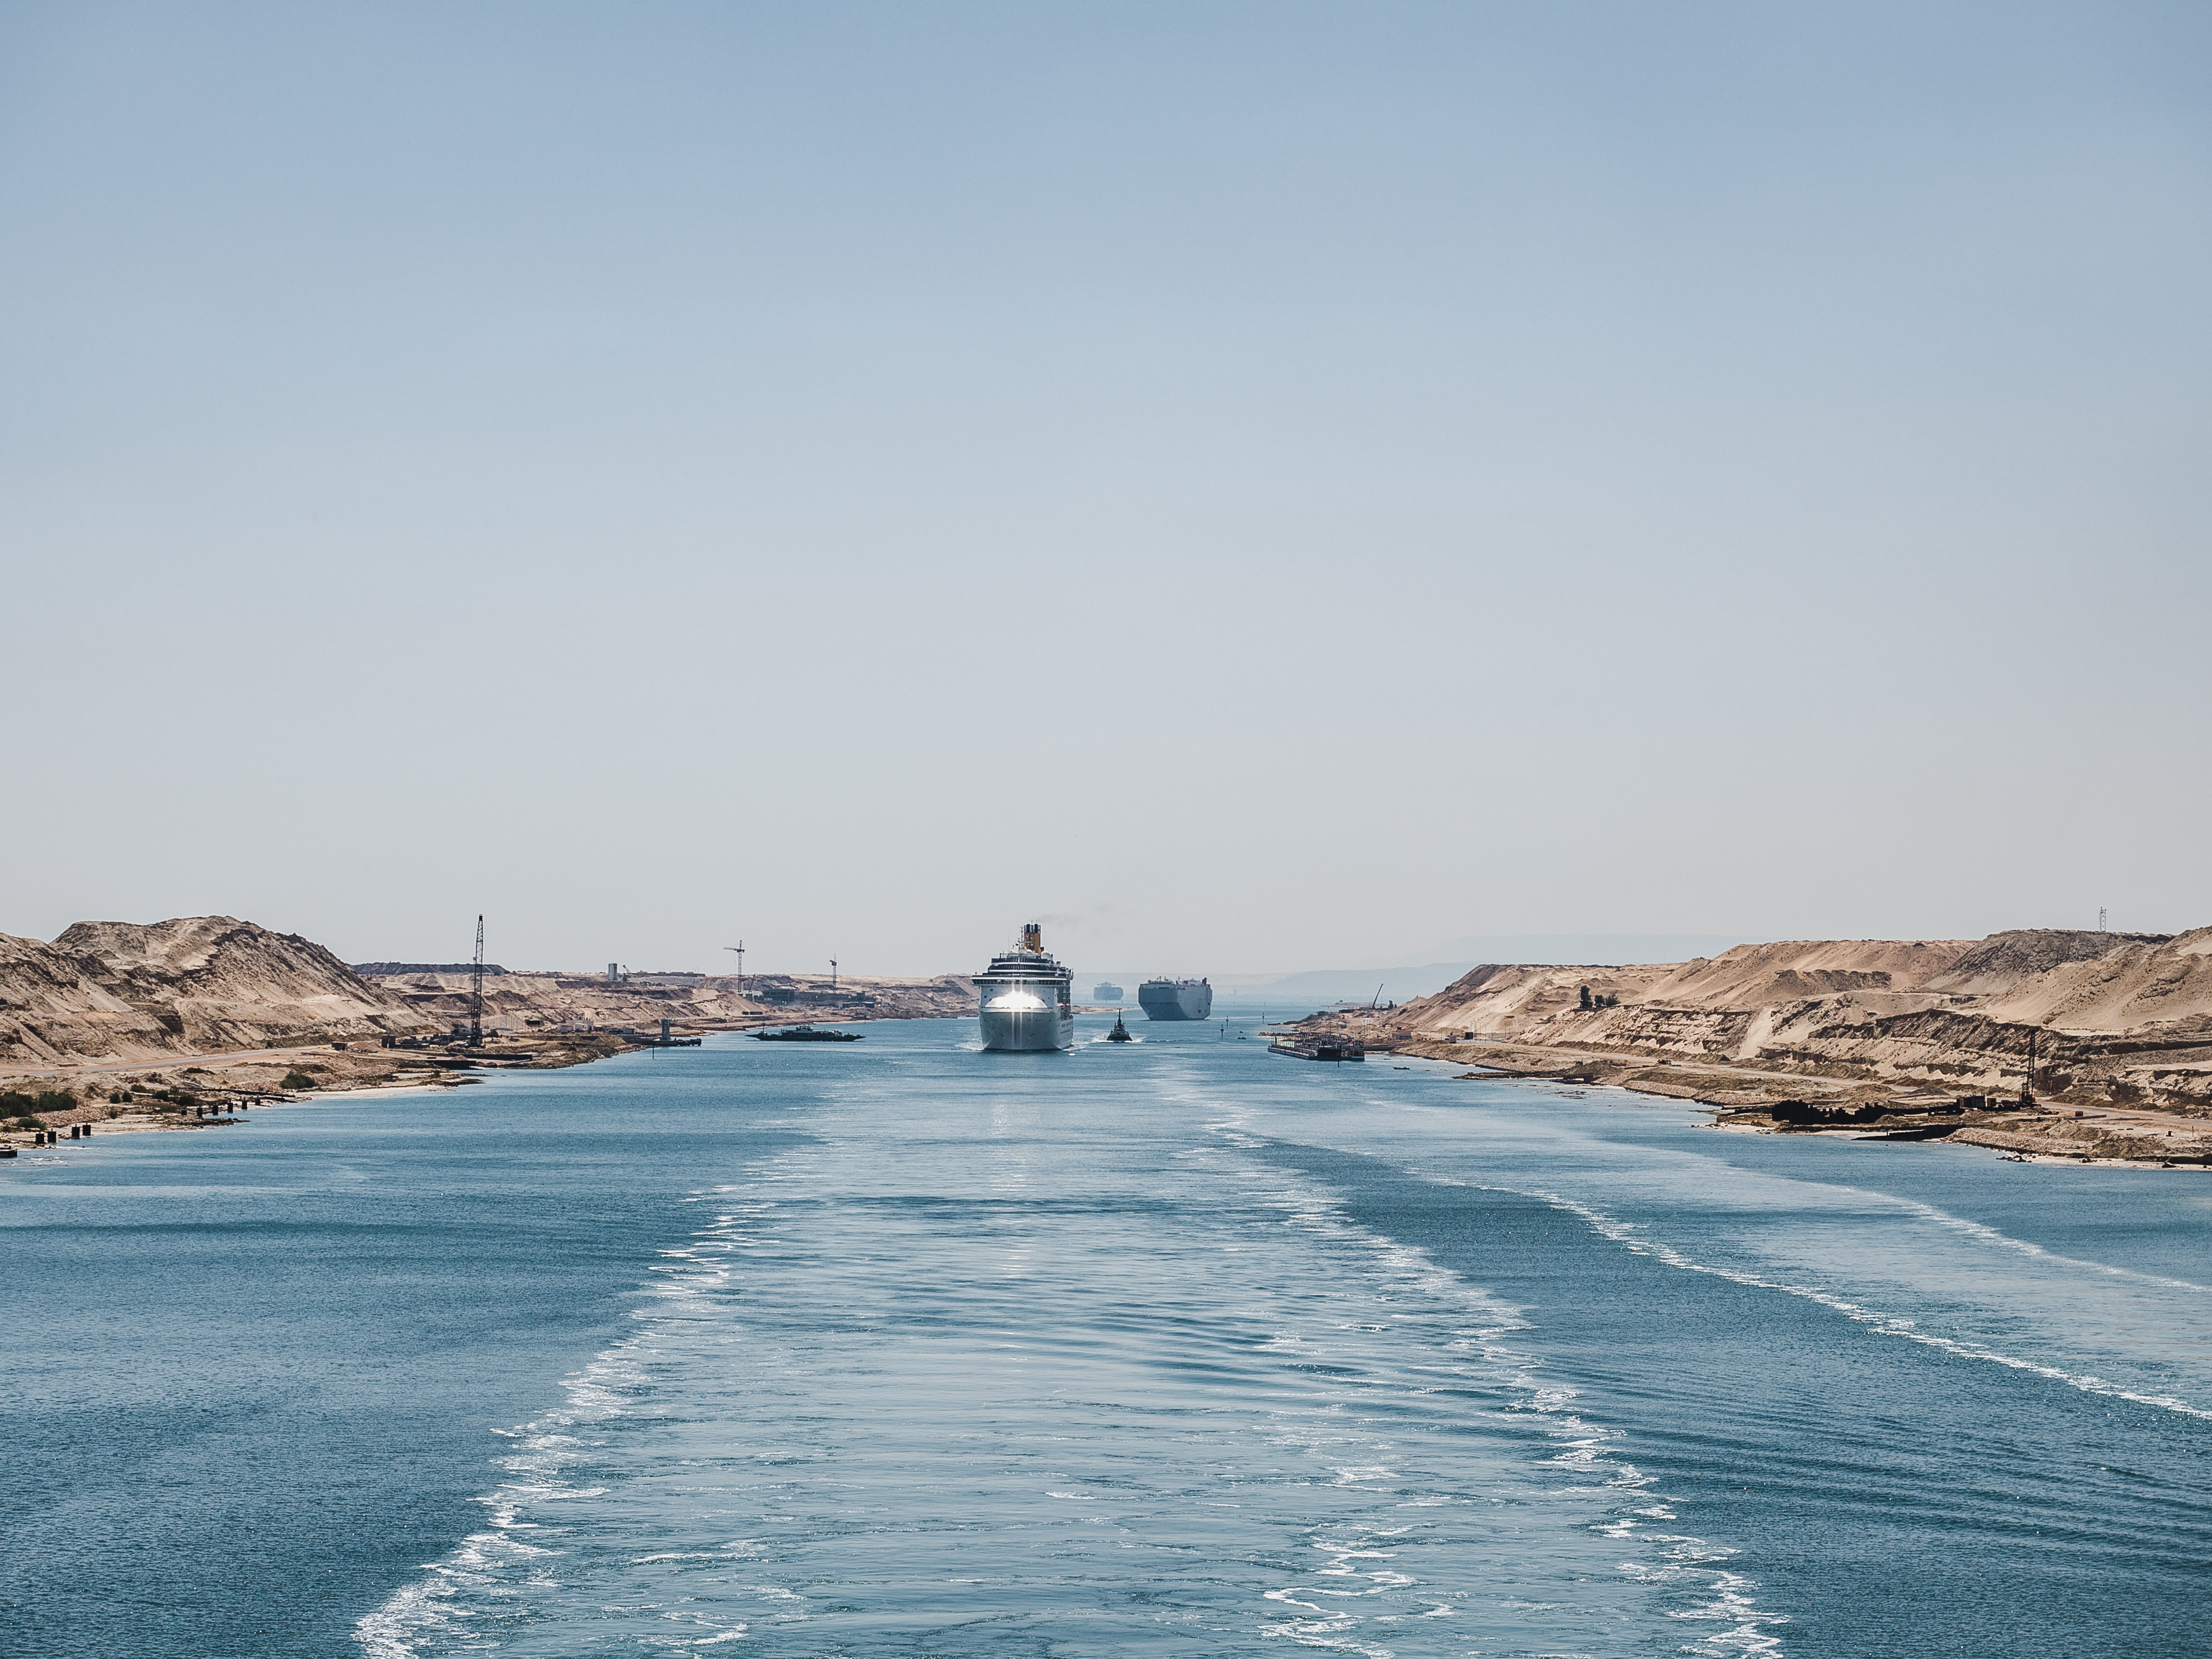 SUEZ CANAL SITUATION EXPLAINED: PROLONGED LOW OIL PRICES